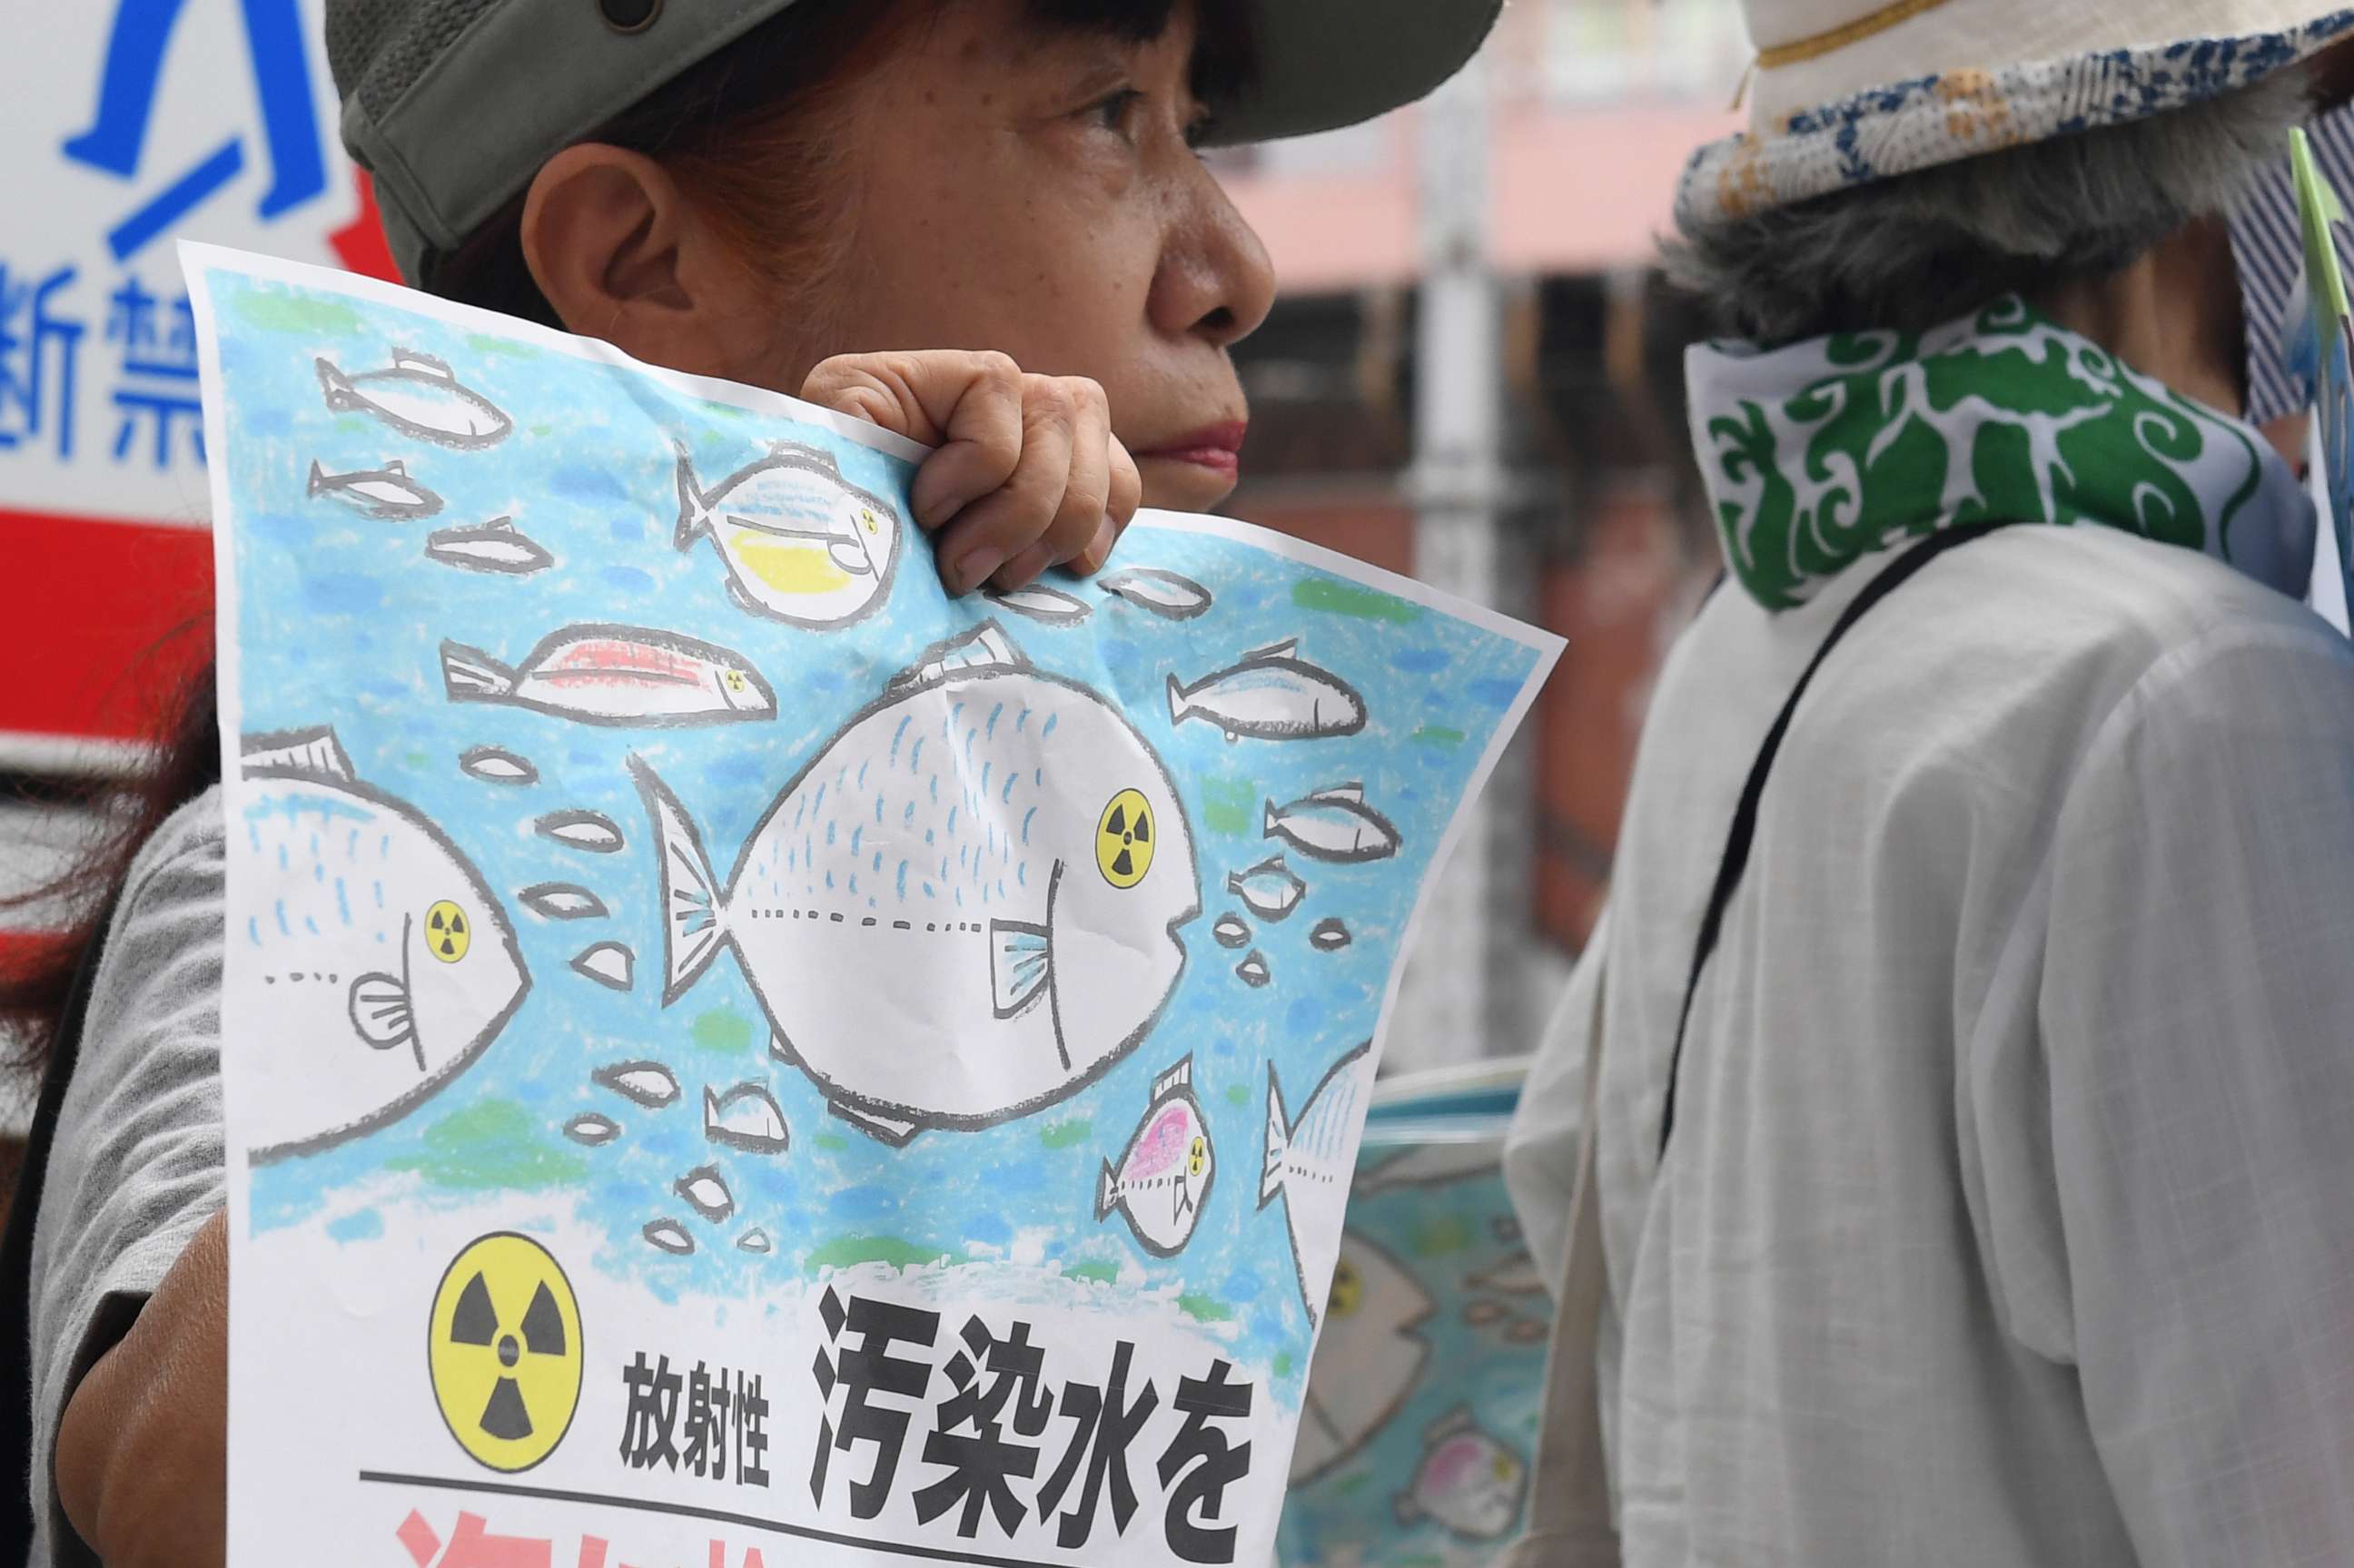 PHOTO: A protester holds a sign which partly reads "Do not discharge the wastewater into the sea" during a rally in front of TEPCO headquarters, Thursday, Aug. 24, 2023, in Tokyo.